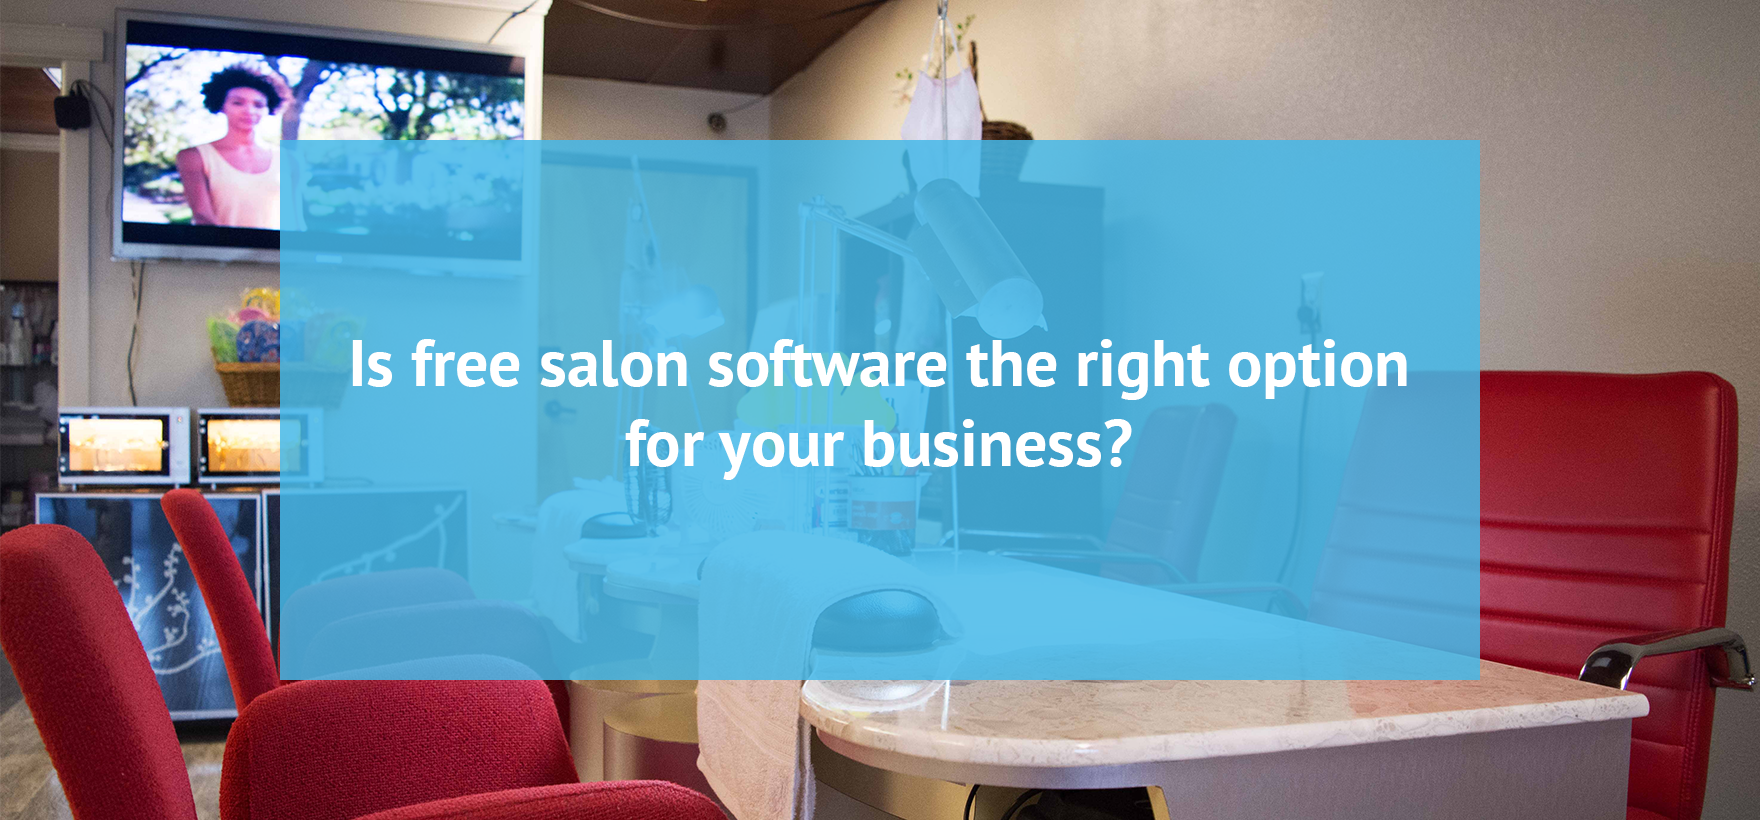 Is free salon software the right option for your business?